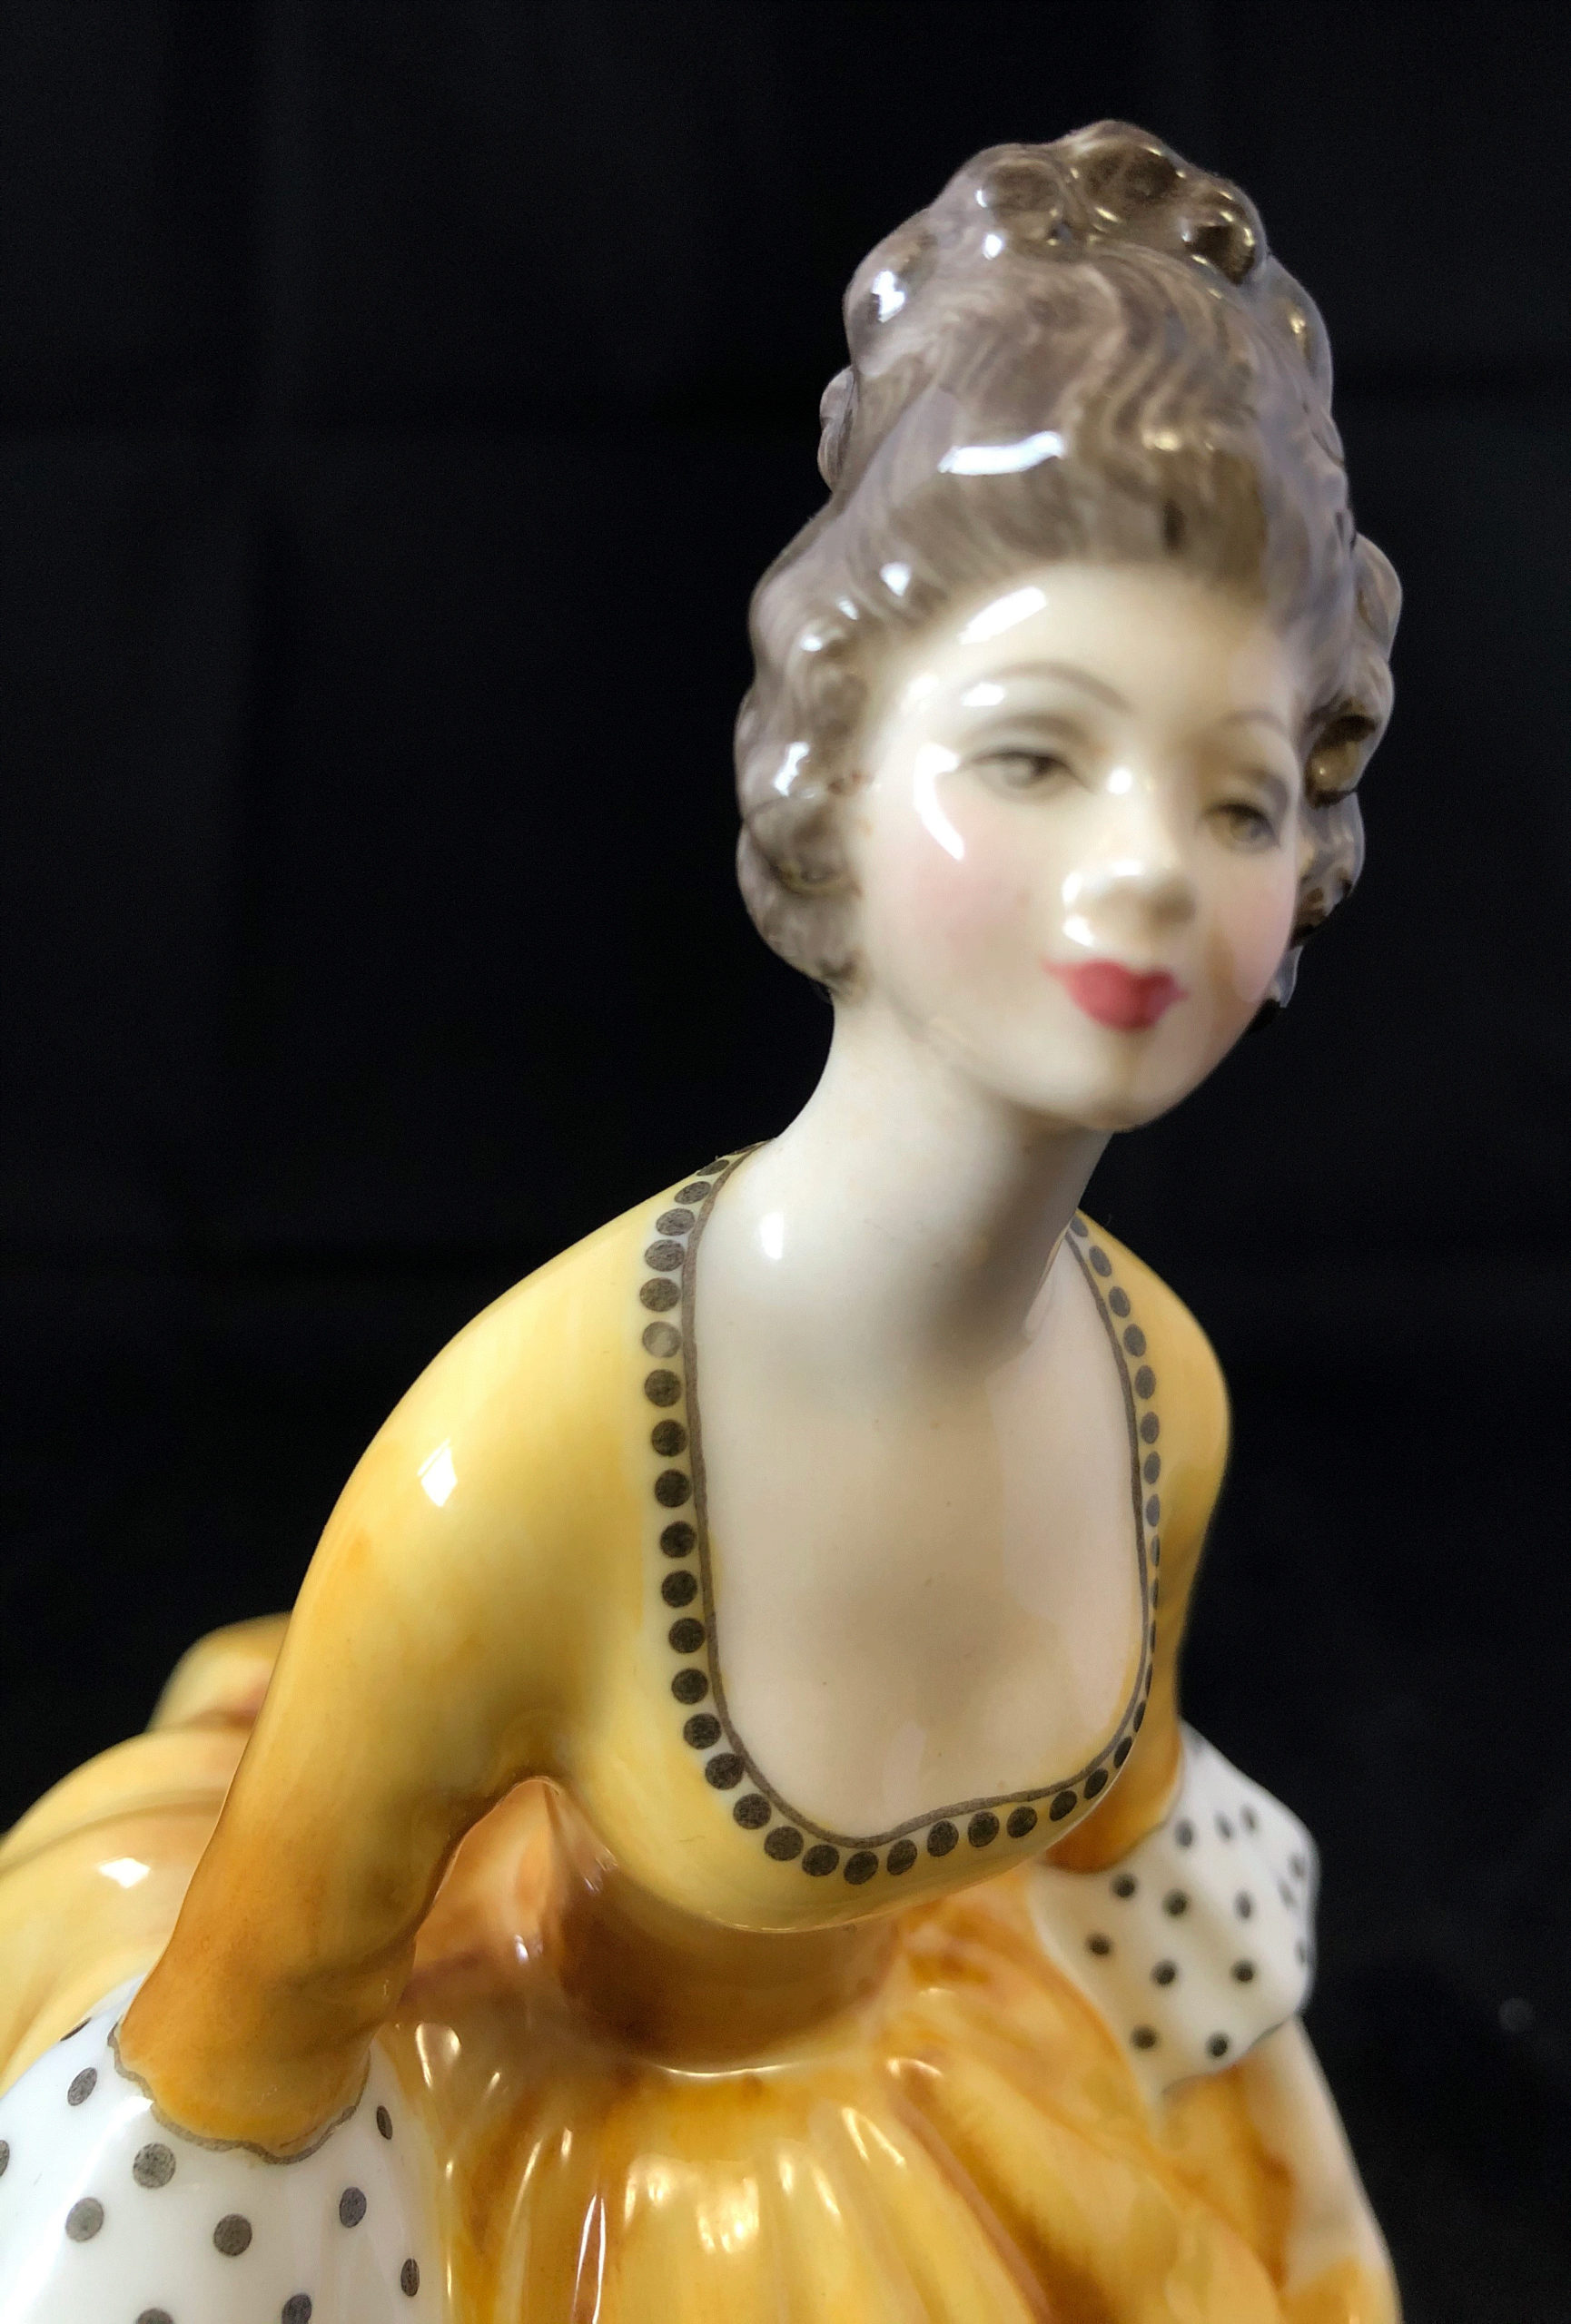 You are currently viewing Royal Doulton Figurine Coralie HN 2307 England Figurine